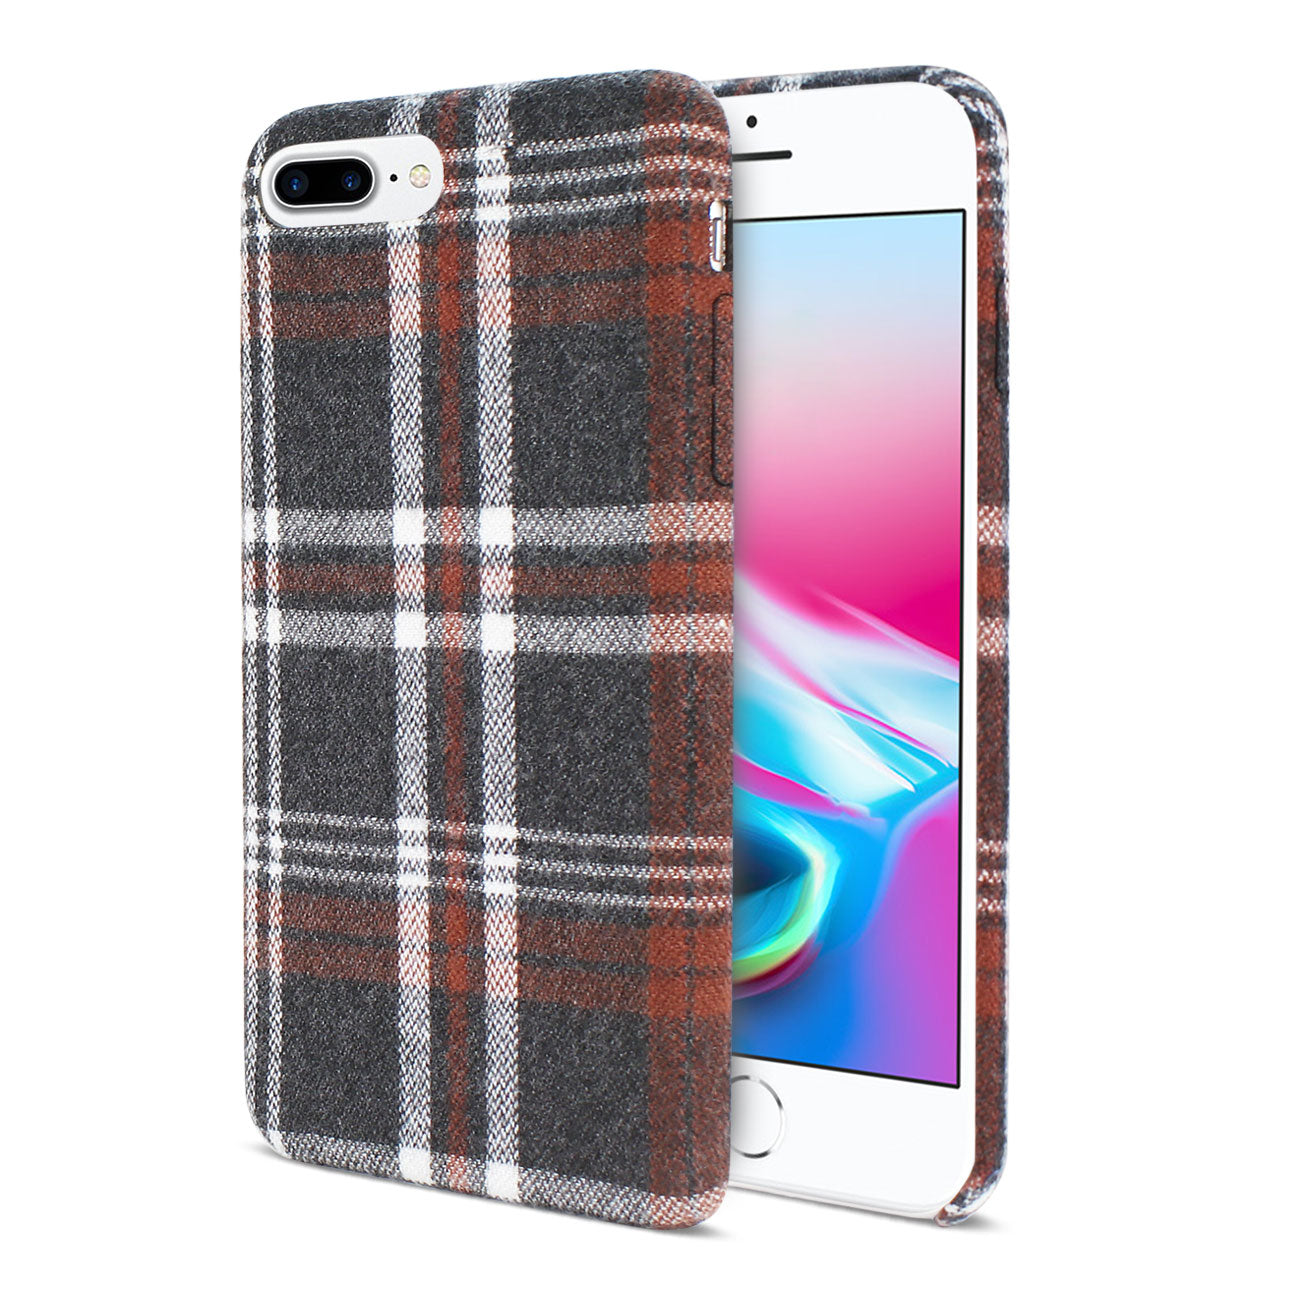 Reiko iPhone 8 Plus Checked Fabric Case In Brown